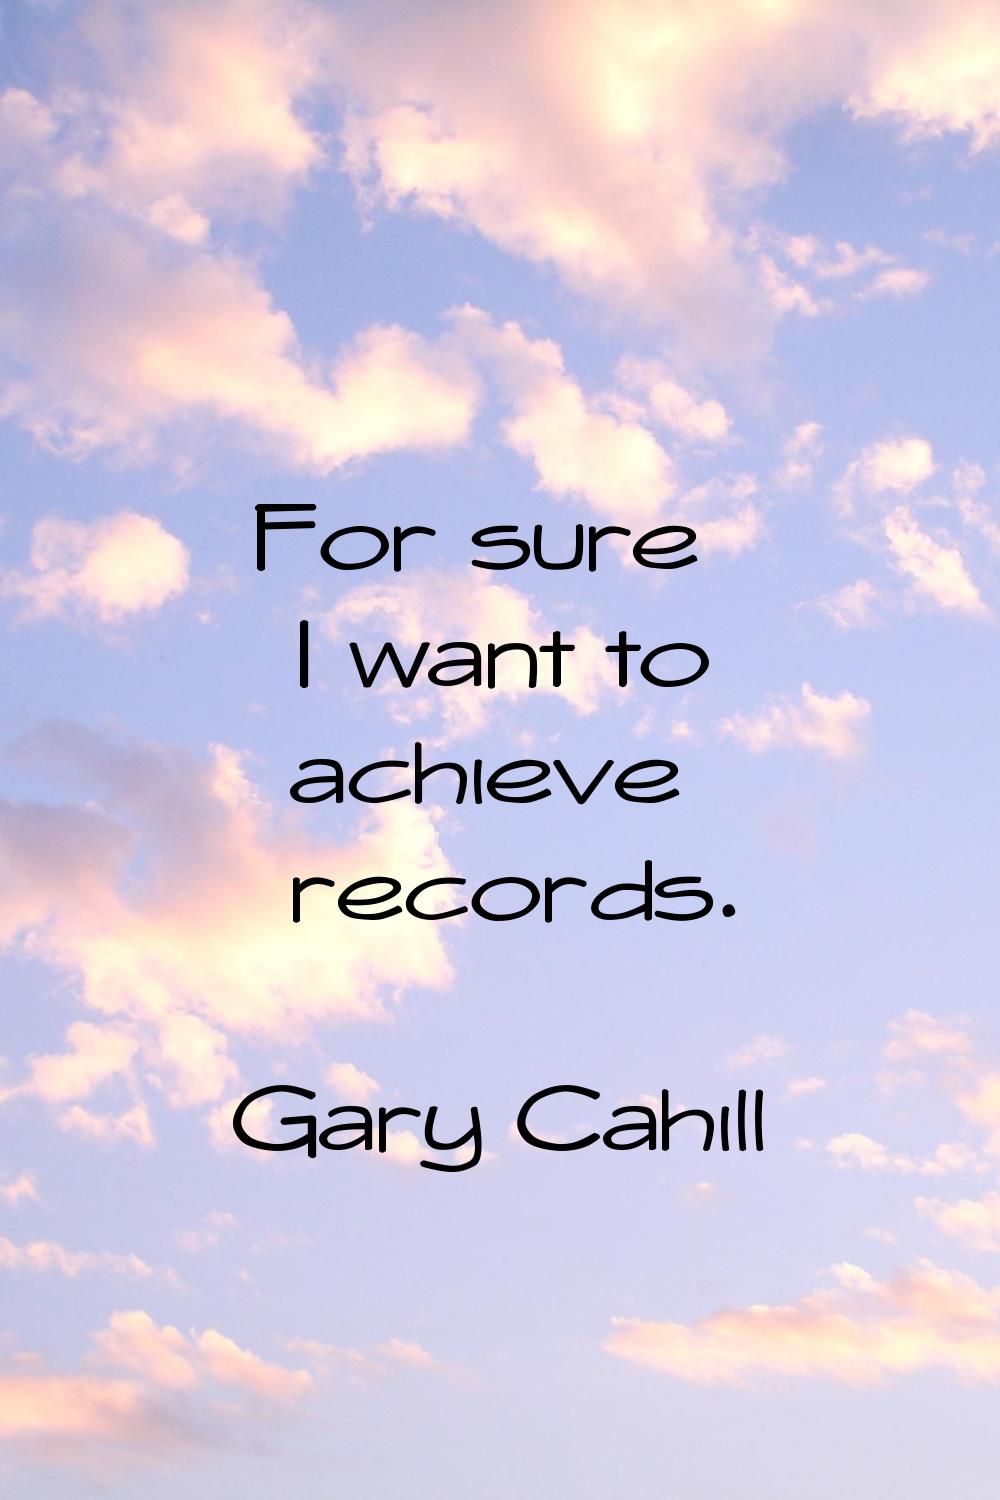 For sure I want to achieve records.